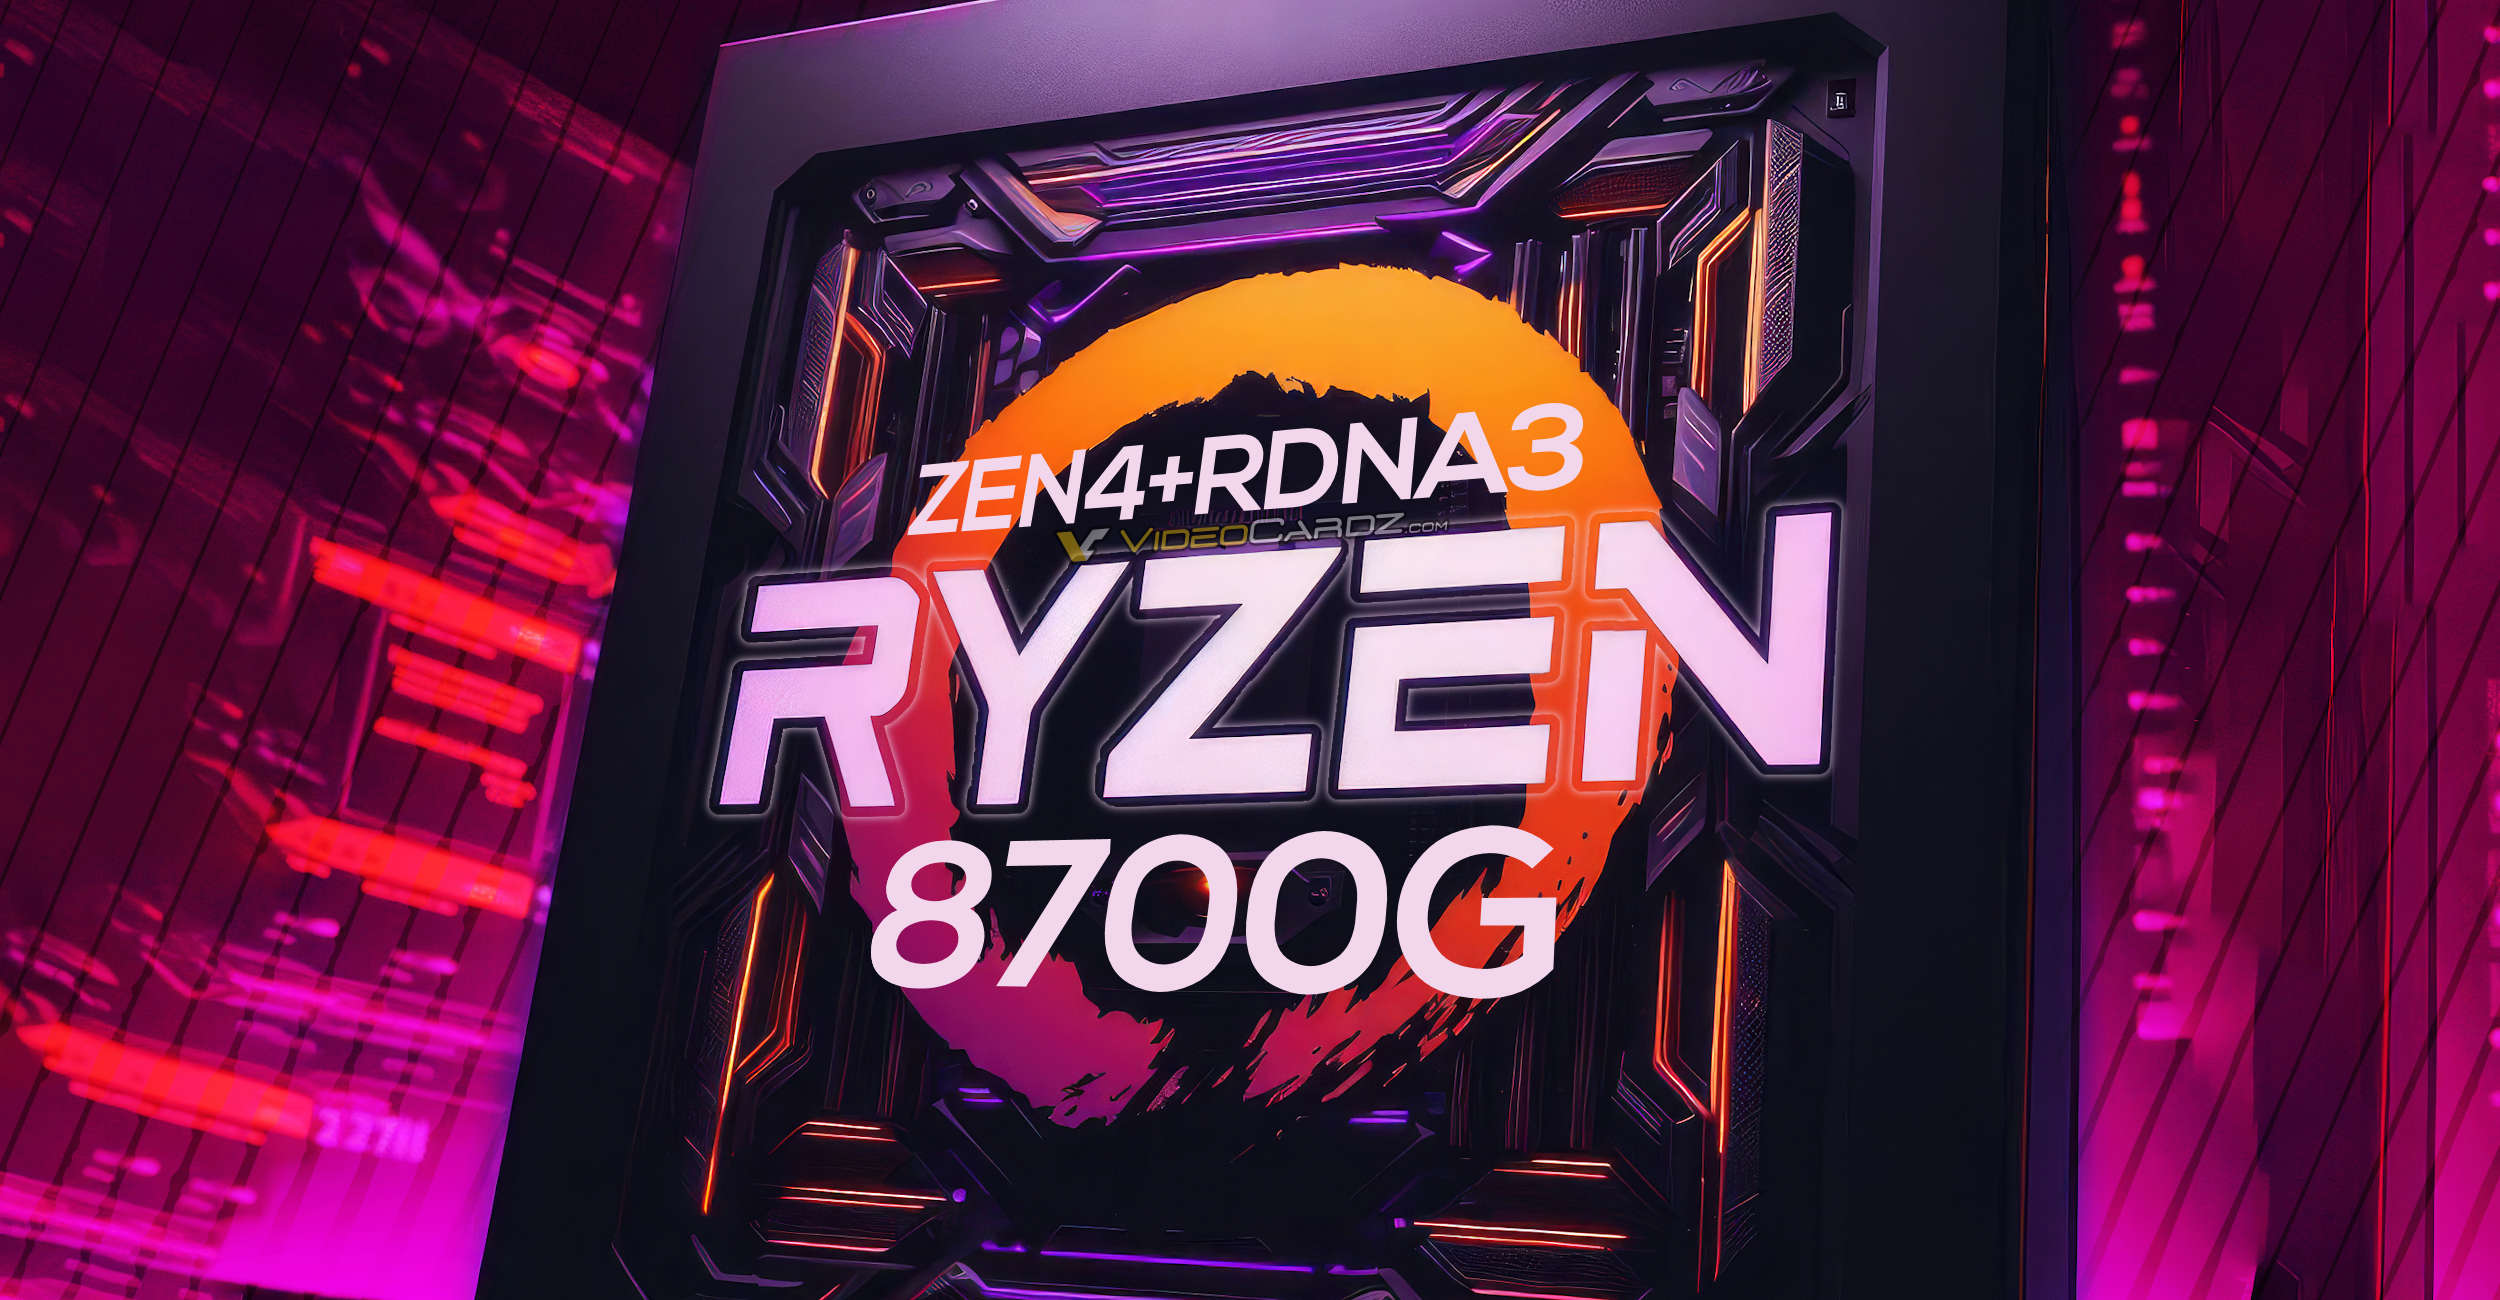 AMD Ryzen 9000, Featured, Review Roundup AMD Ryzen 8700G, 8600G and 8600G tested AMD has lifted the embargo on their first desktop APUs for AM5 socket.  AMD Ryzen 8000G Reviews Media APU Model